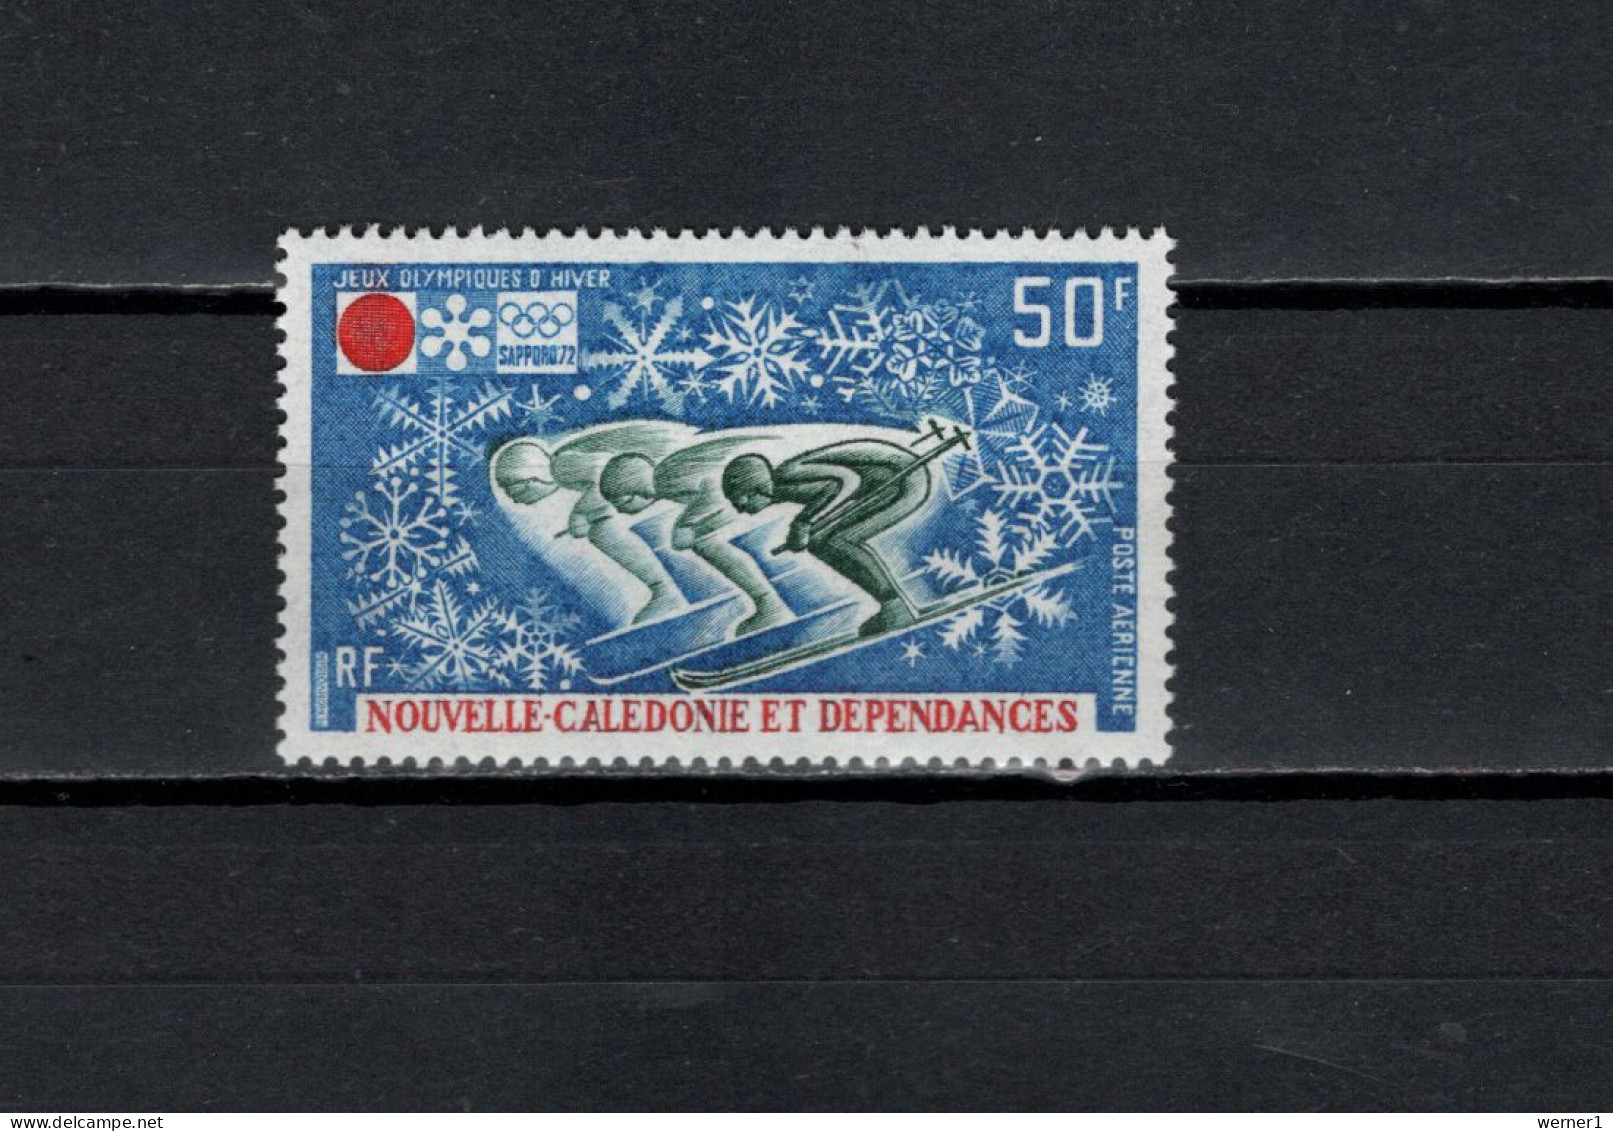 New Caledonia 1972 Olympic Games Sapporo Stamp MNH - Inverno1972: Sapporo